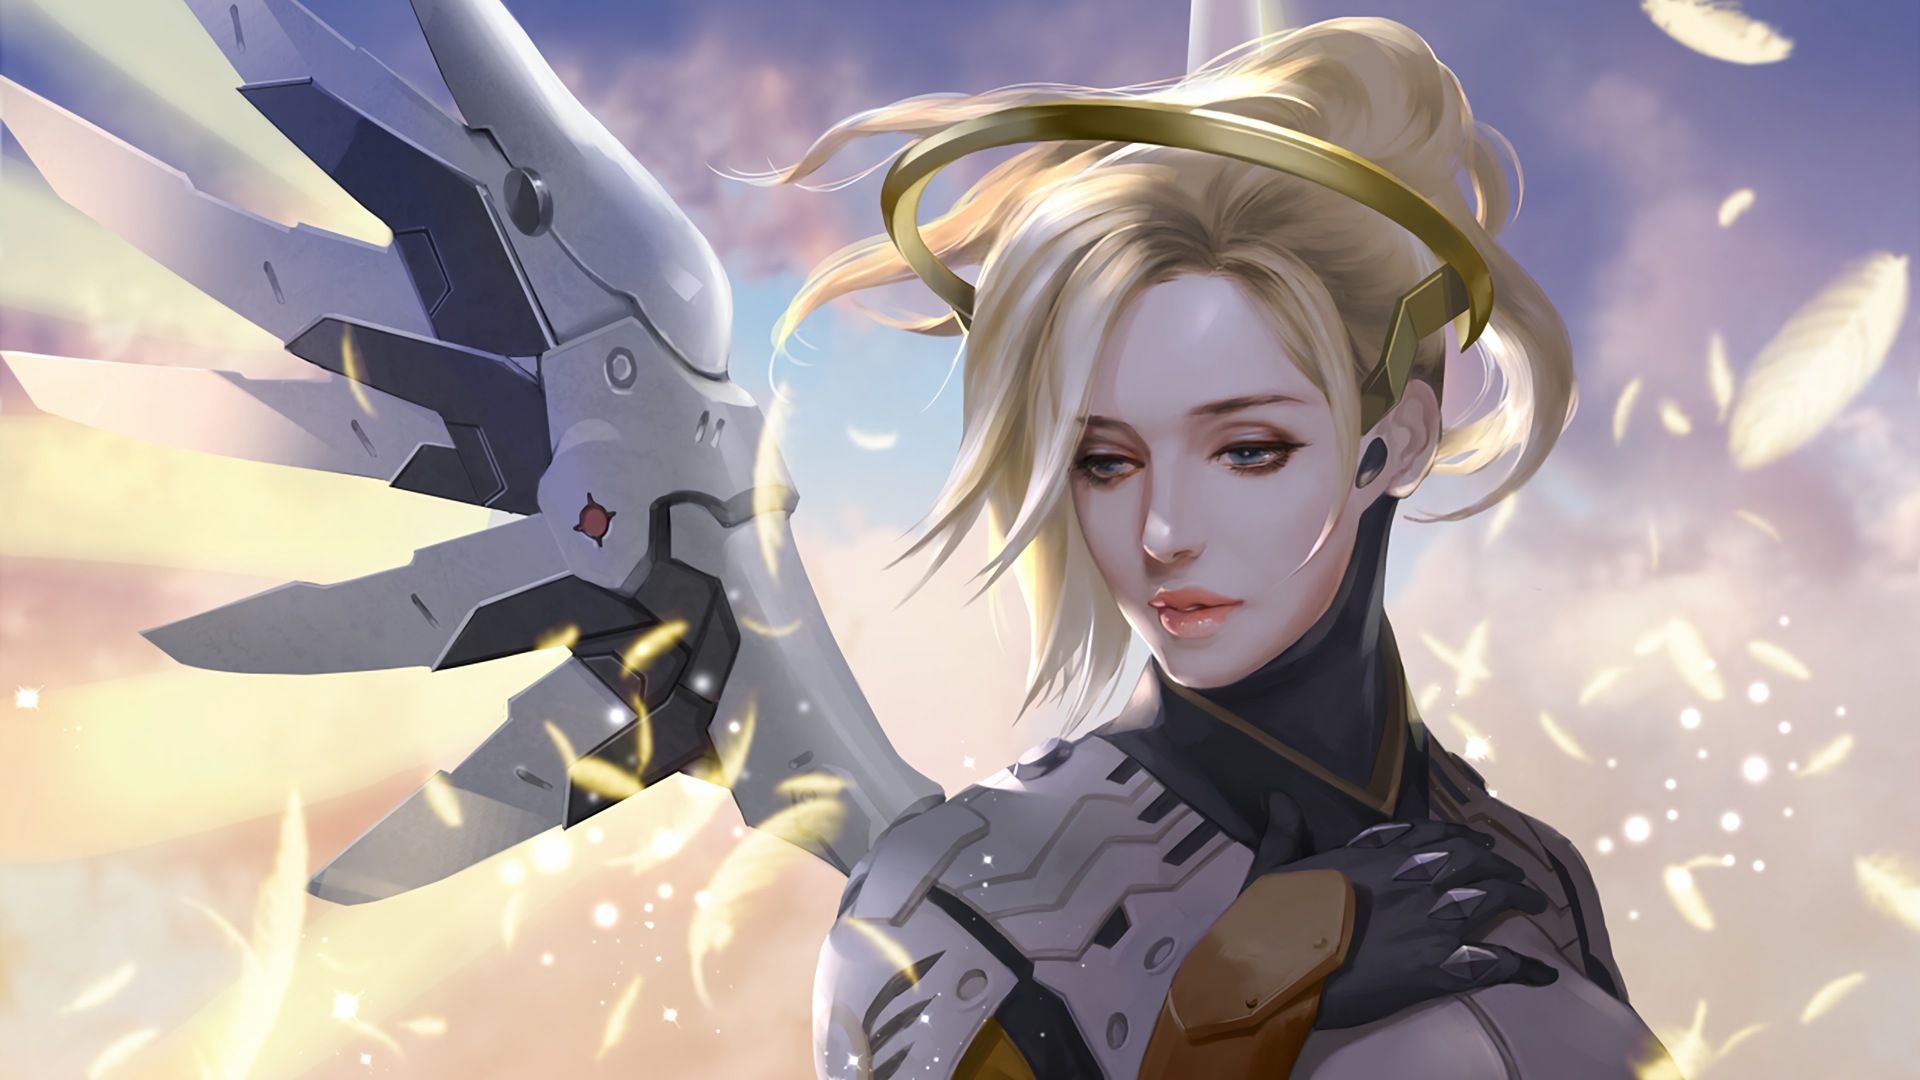 Mercy Overwatch Game Artwork, HD Games, 4k Wallpaper, Image, Background, Photo and Picture